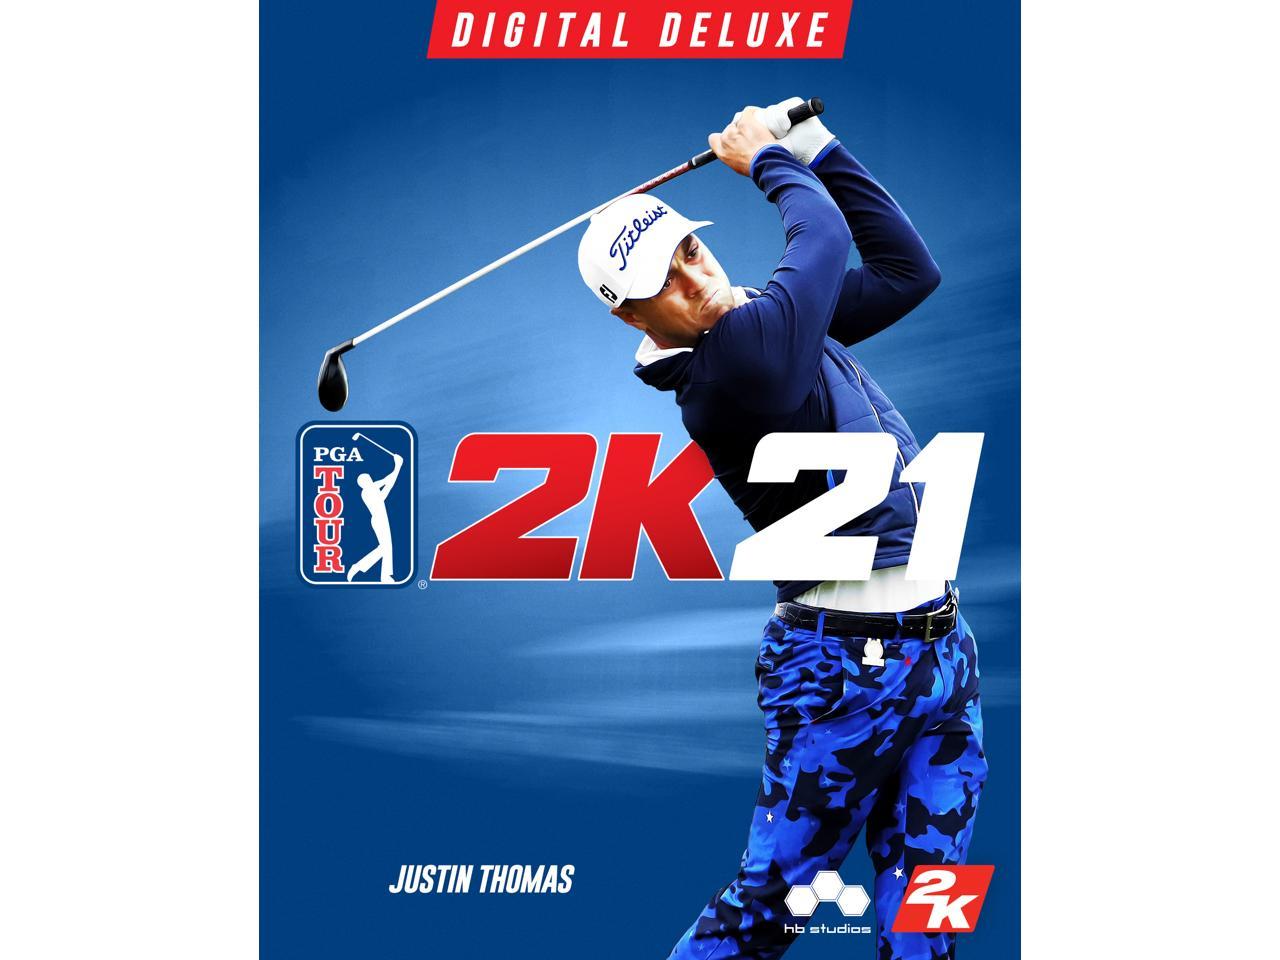 PGA TOUR 2K21 Digital Deluxe Edition for PC [Steam Online Game Code